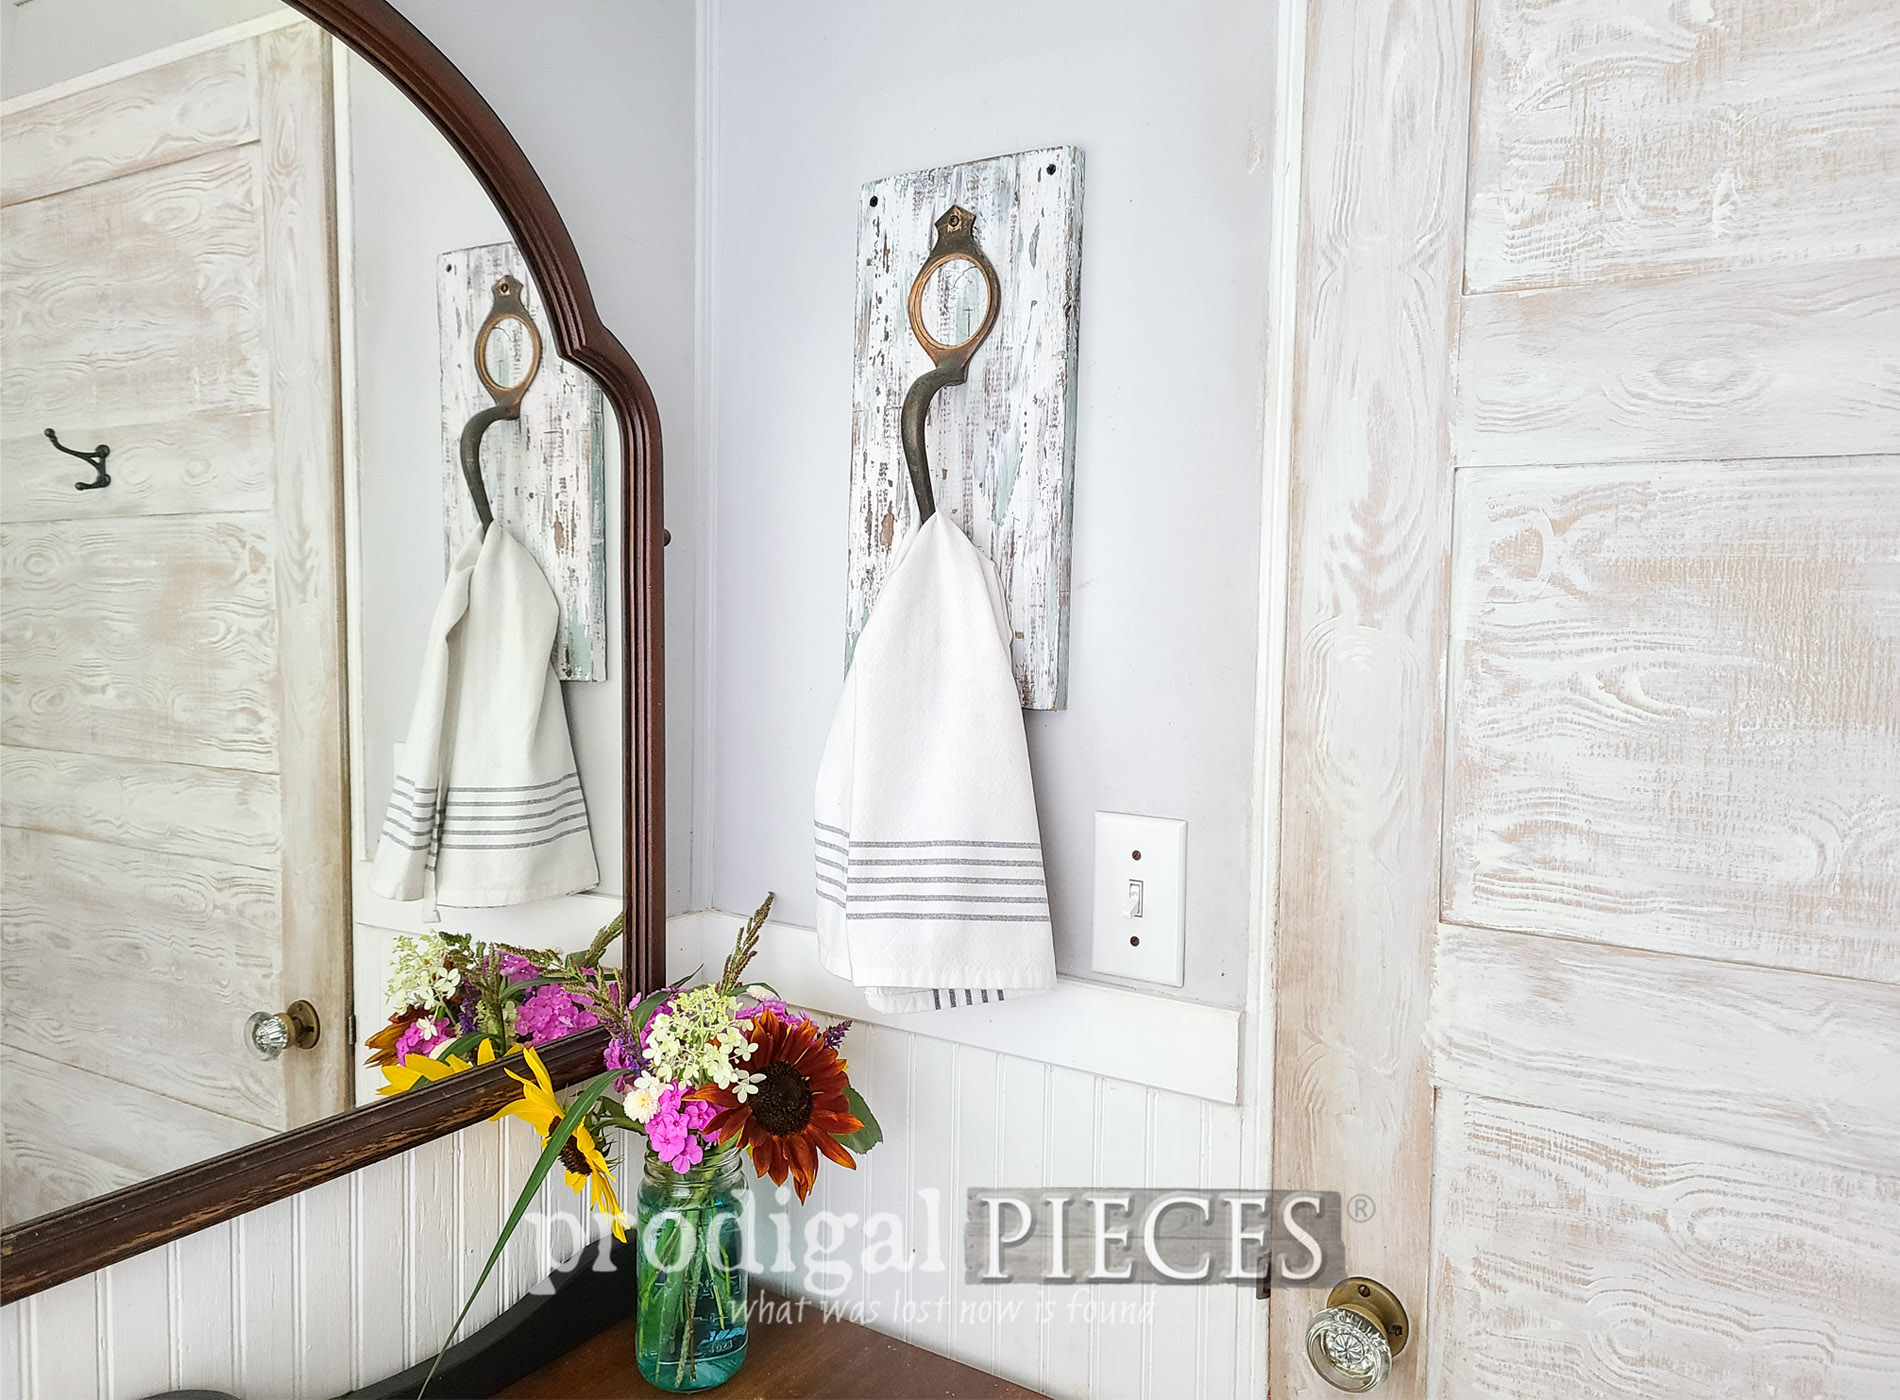 Featured Upcycled Door Handle Towel Holder by Larissa of Prodigal Pieces | prodigalpieces.com #prodigalpieces